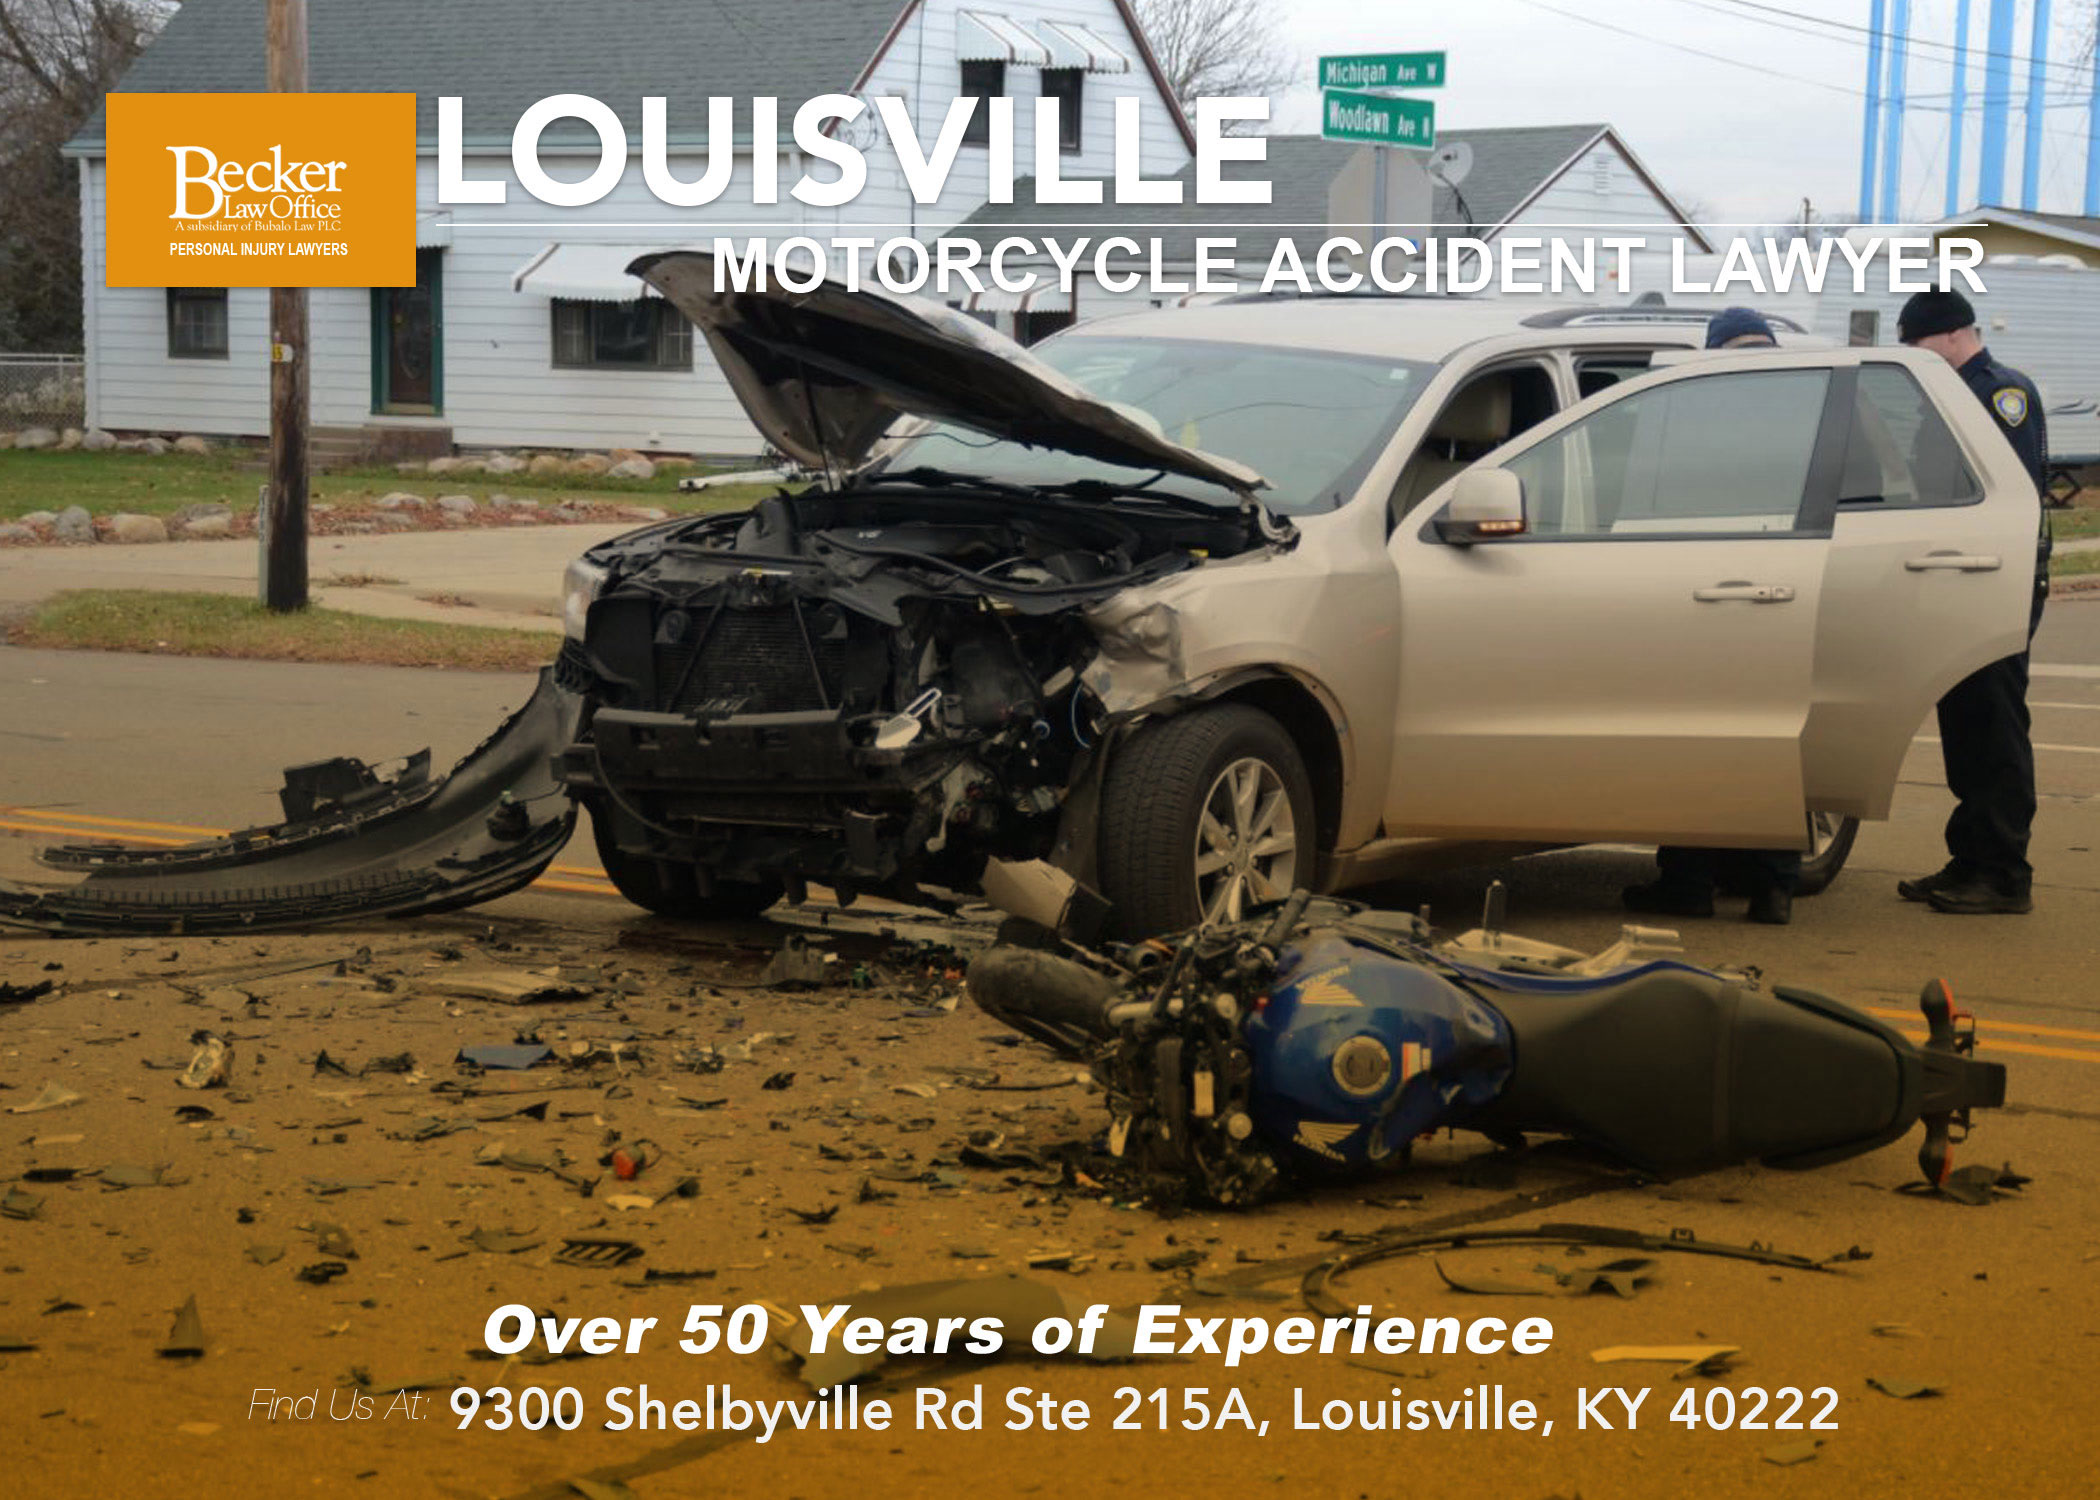 Louisville motorcycle accident Lawyer